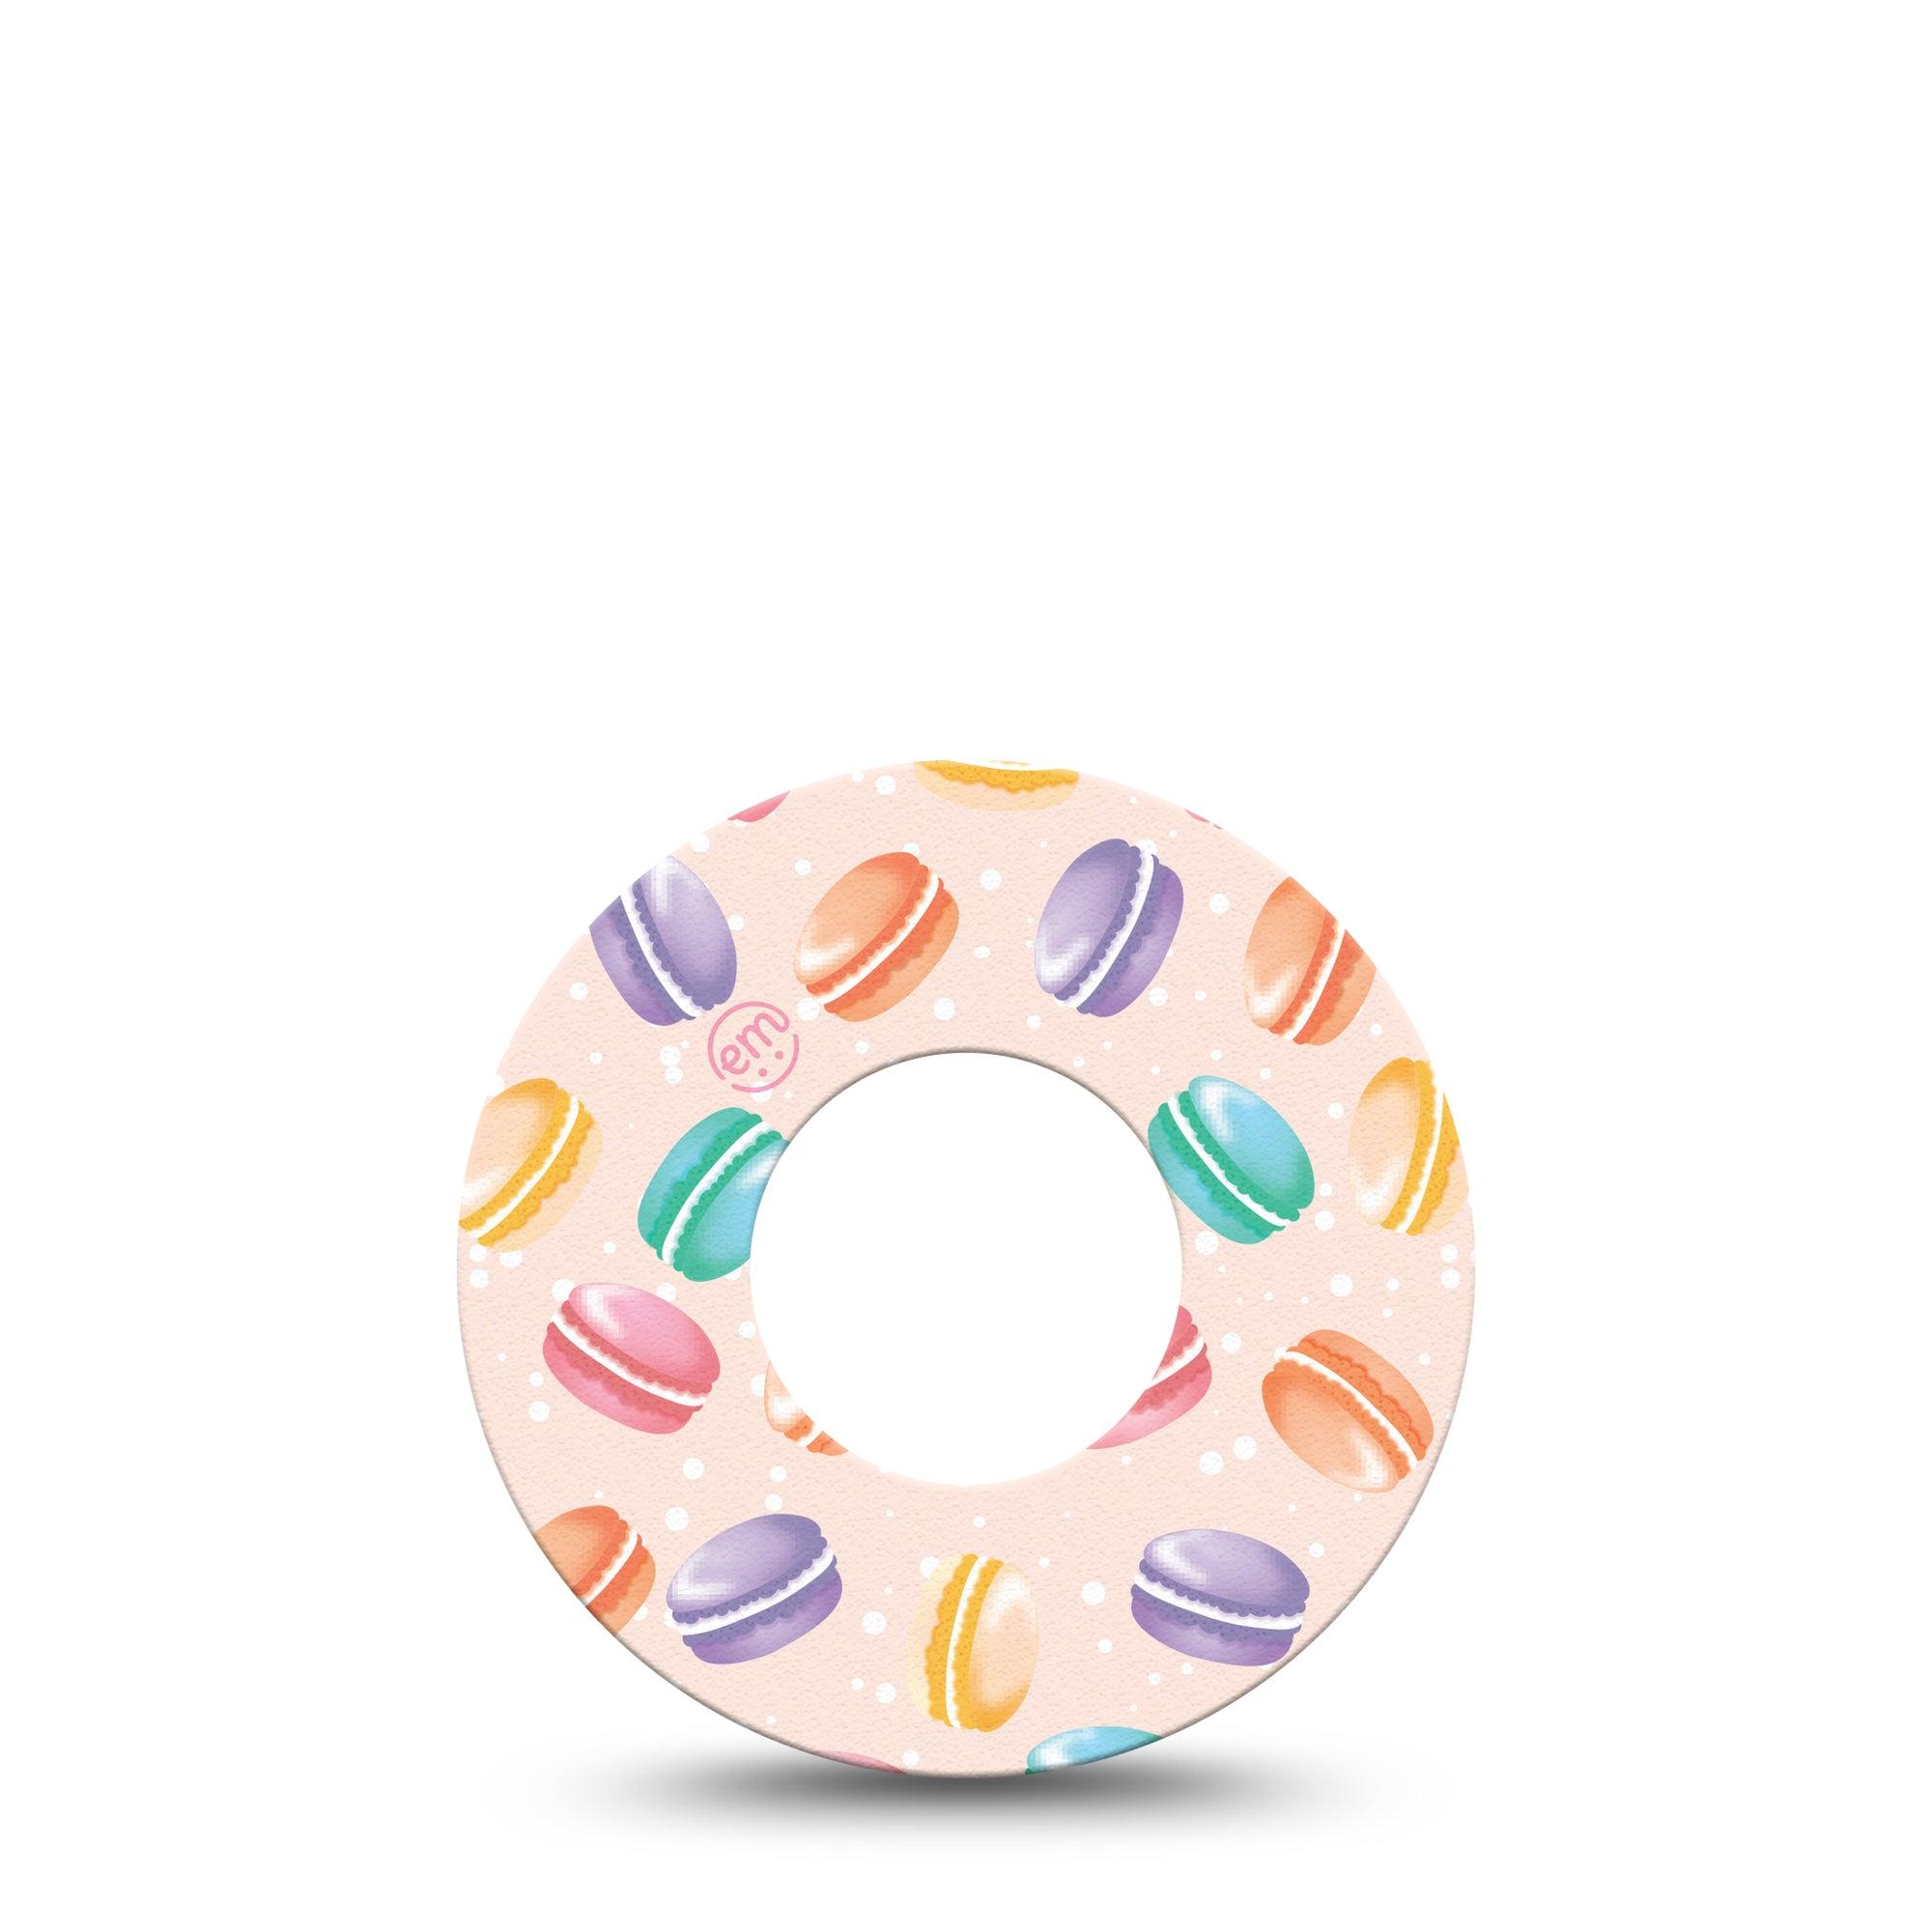 ExpressionMed Macarons Libre 2 Tape, Single, Sweet Delicacy Themed, CGM Overlay Patch Design